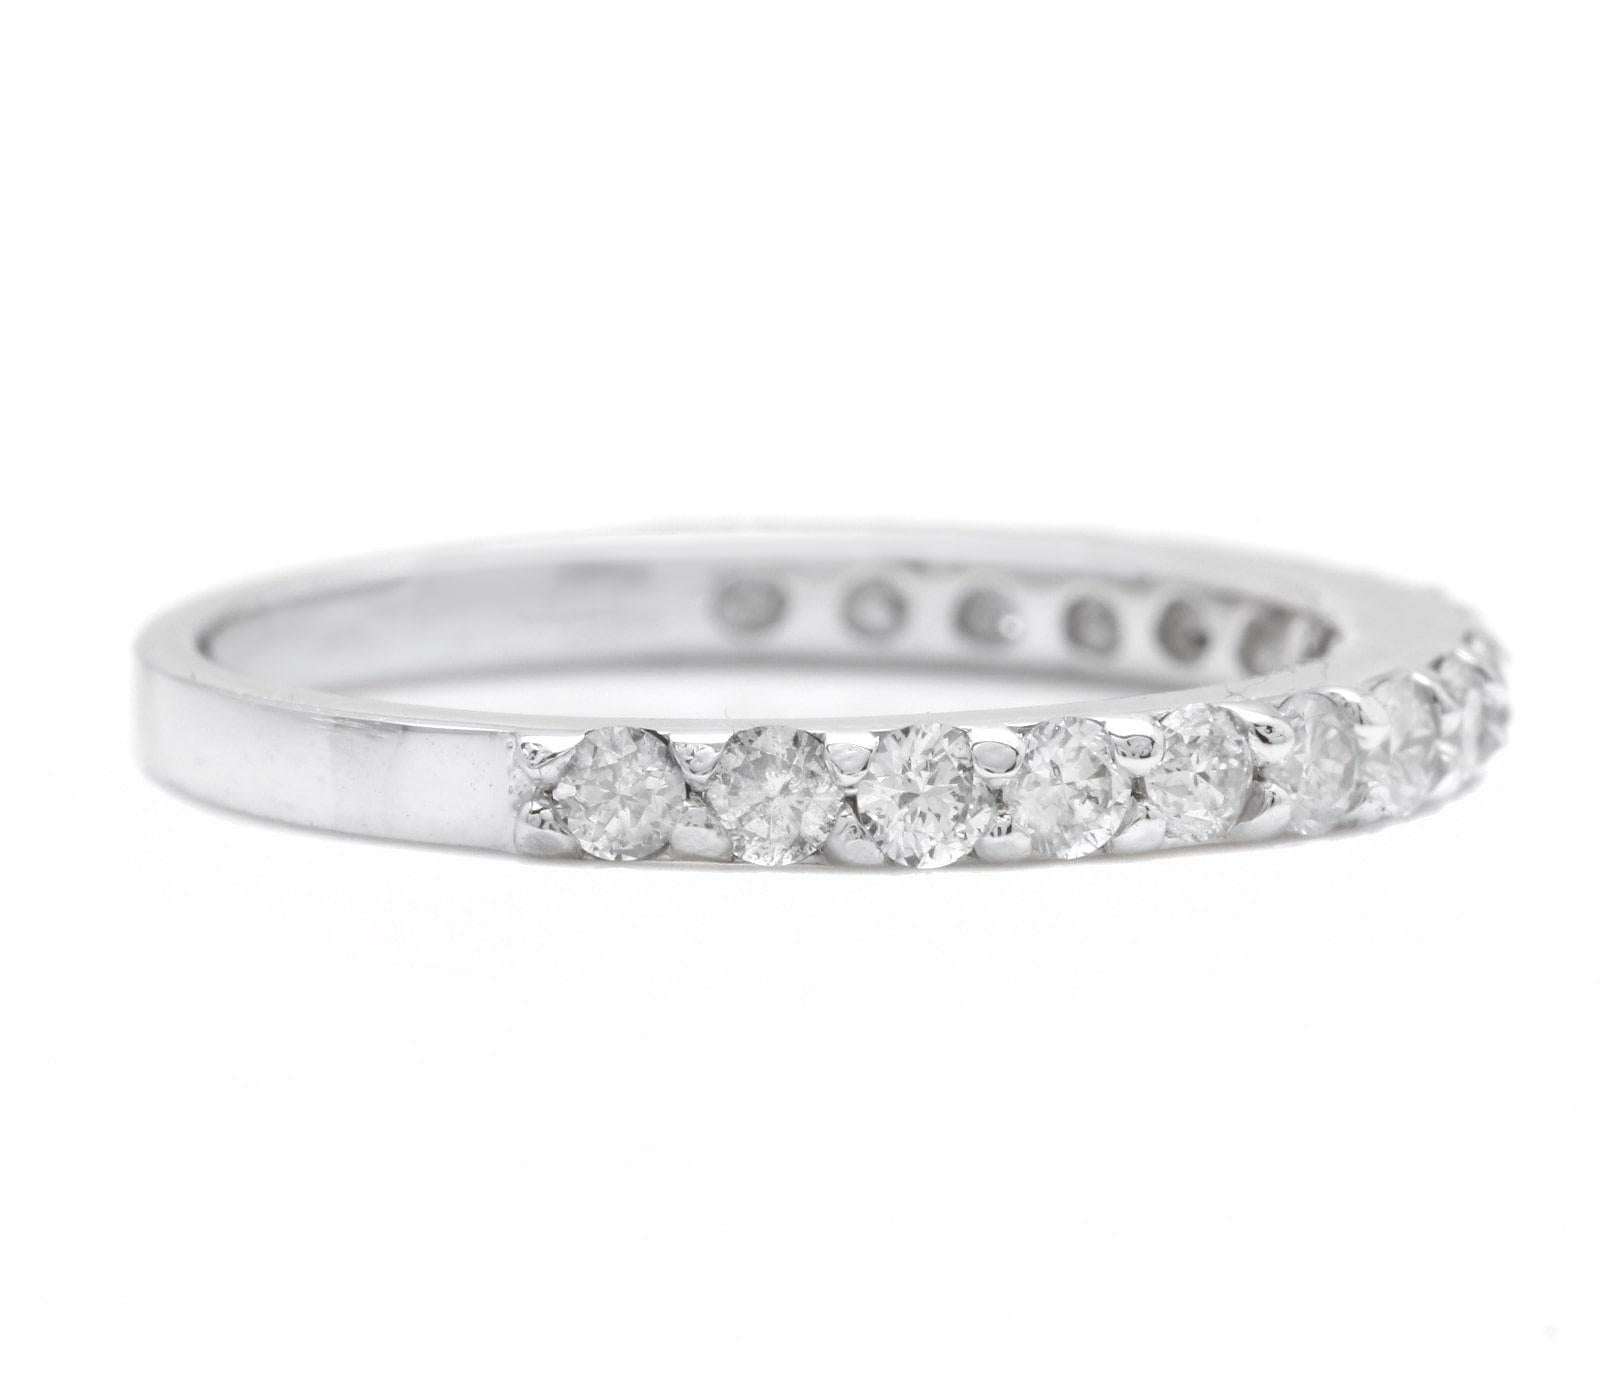 Splendid 0.65 Carats Natural Diamond 14K Solid White Gold Ring

Suggested Replacement Value: Approx. $2,000.00

Stamped: 14K

Total Natural Round Cut Diamonds Weight: Approx. 0.65 Carats (color G-H / Clarity SI1-SI2)

The width of the ring is: